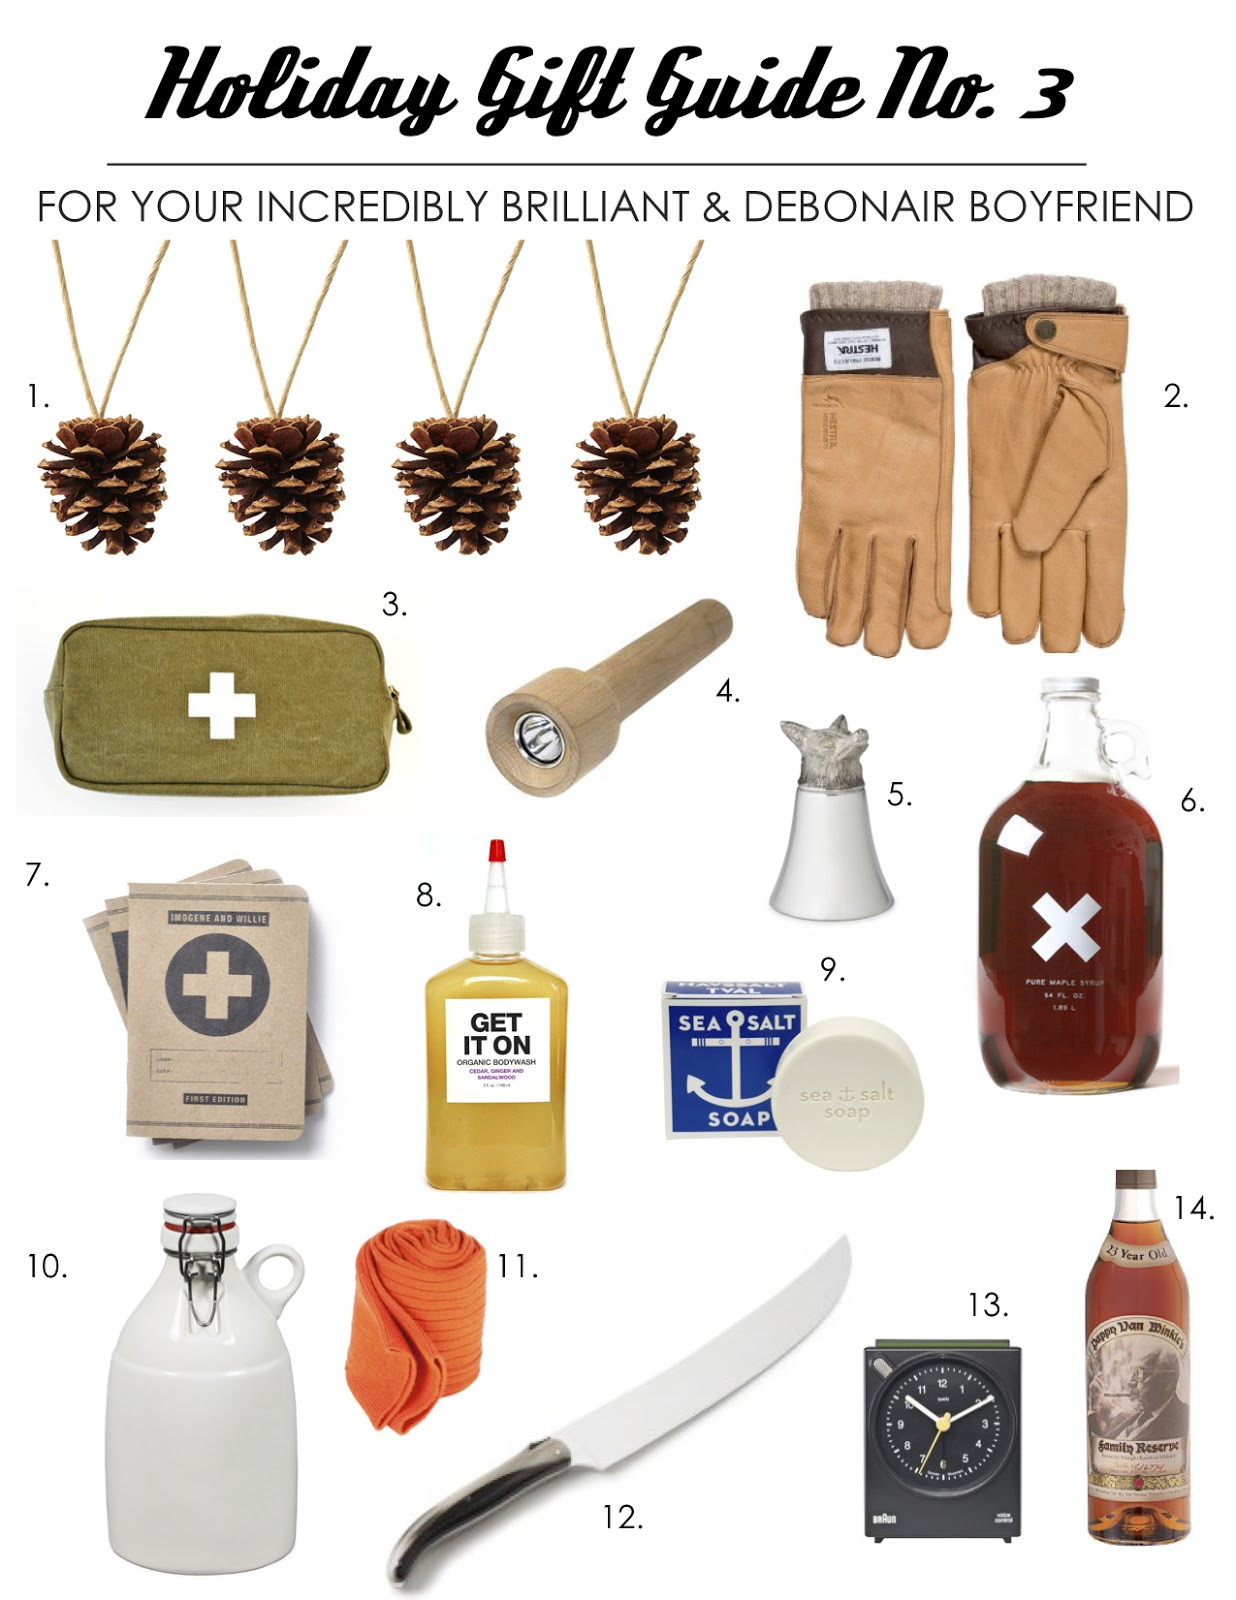 Best Gift Ideas For Boyfriend
 Gift Guide 2012 The Best Gifts for Your Boyfriend Hey